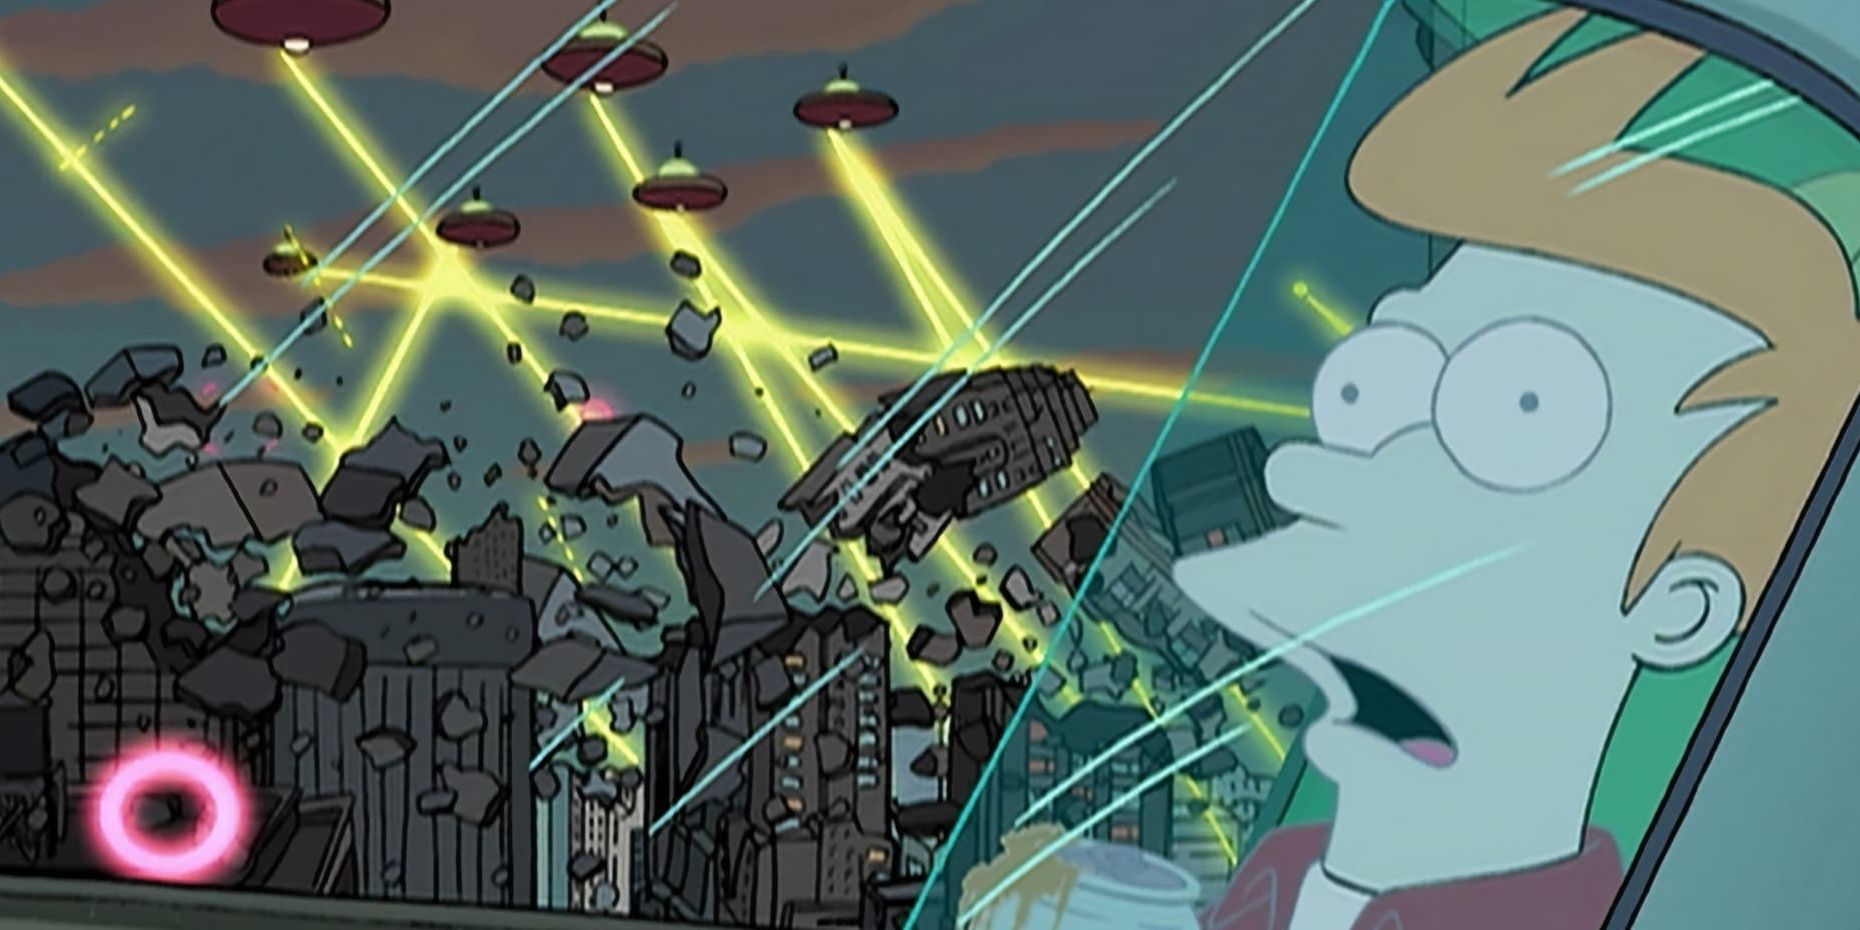 The Best Episode of Futurama From Each Season Ranked (According to IMDB)